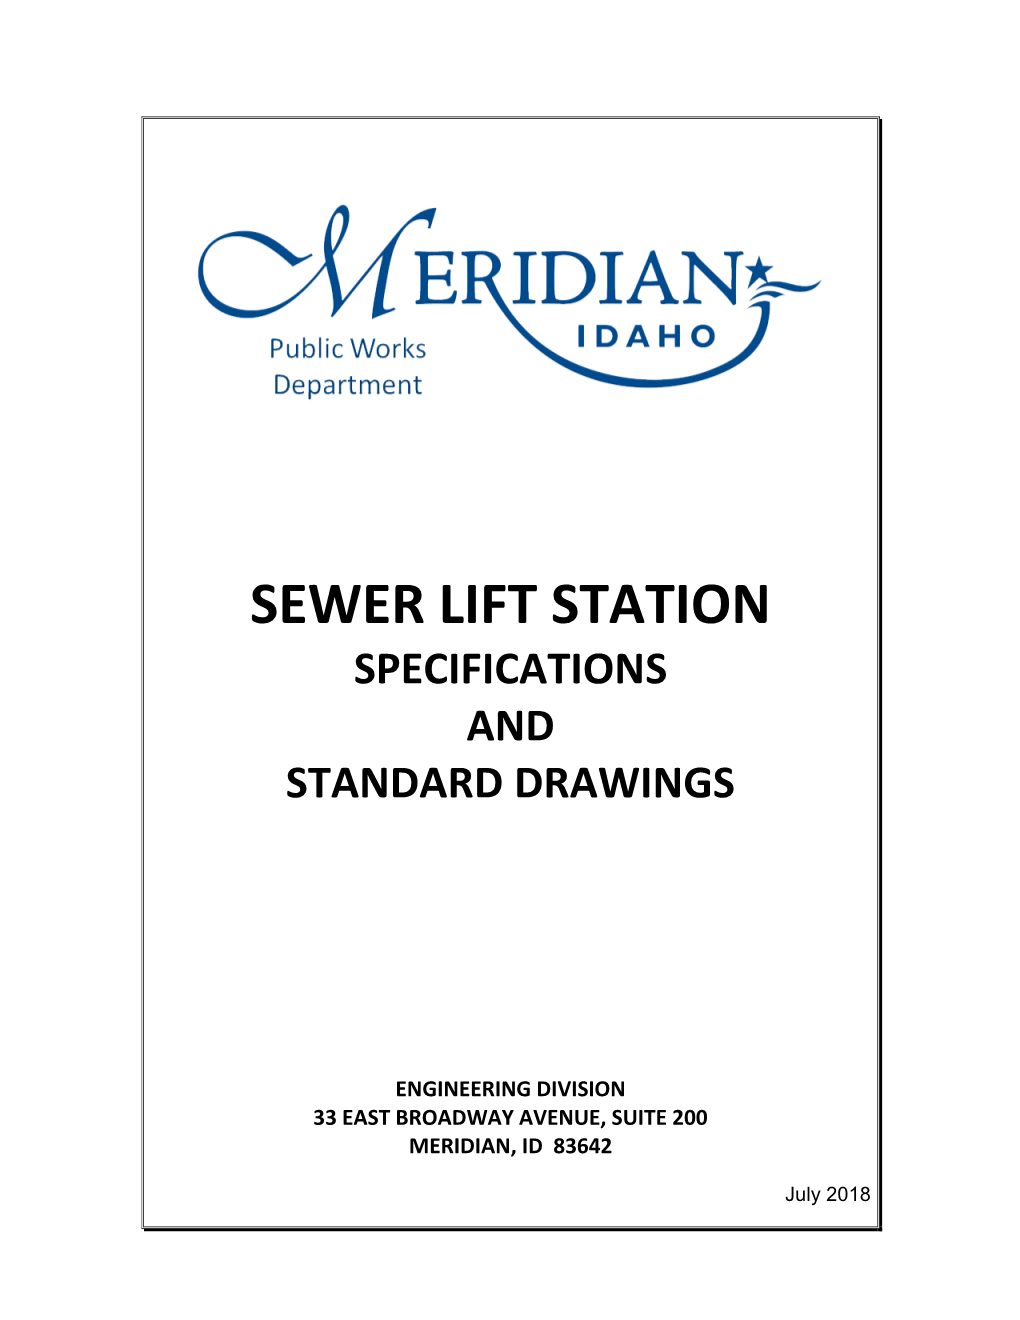 Sewer Lift Station Specifications and Standard Drawings